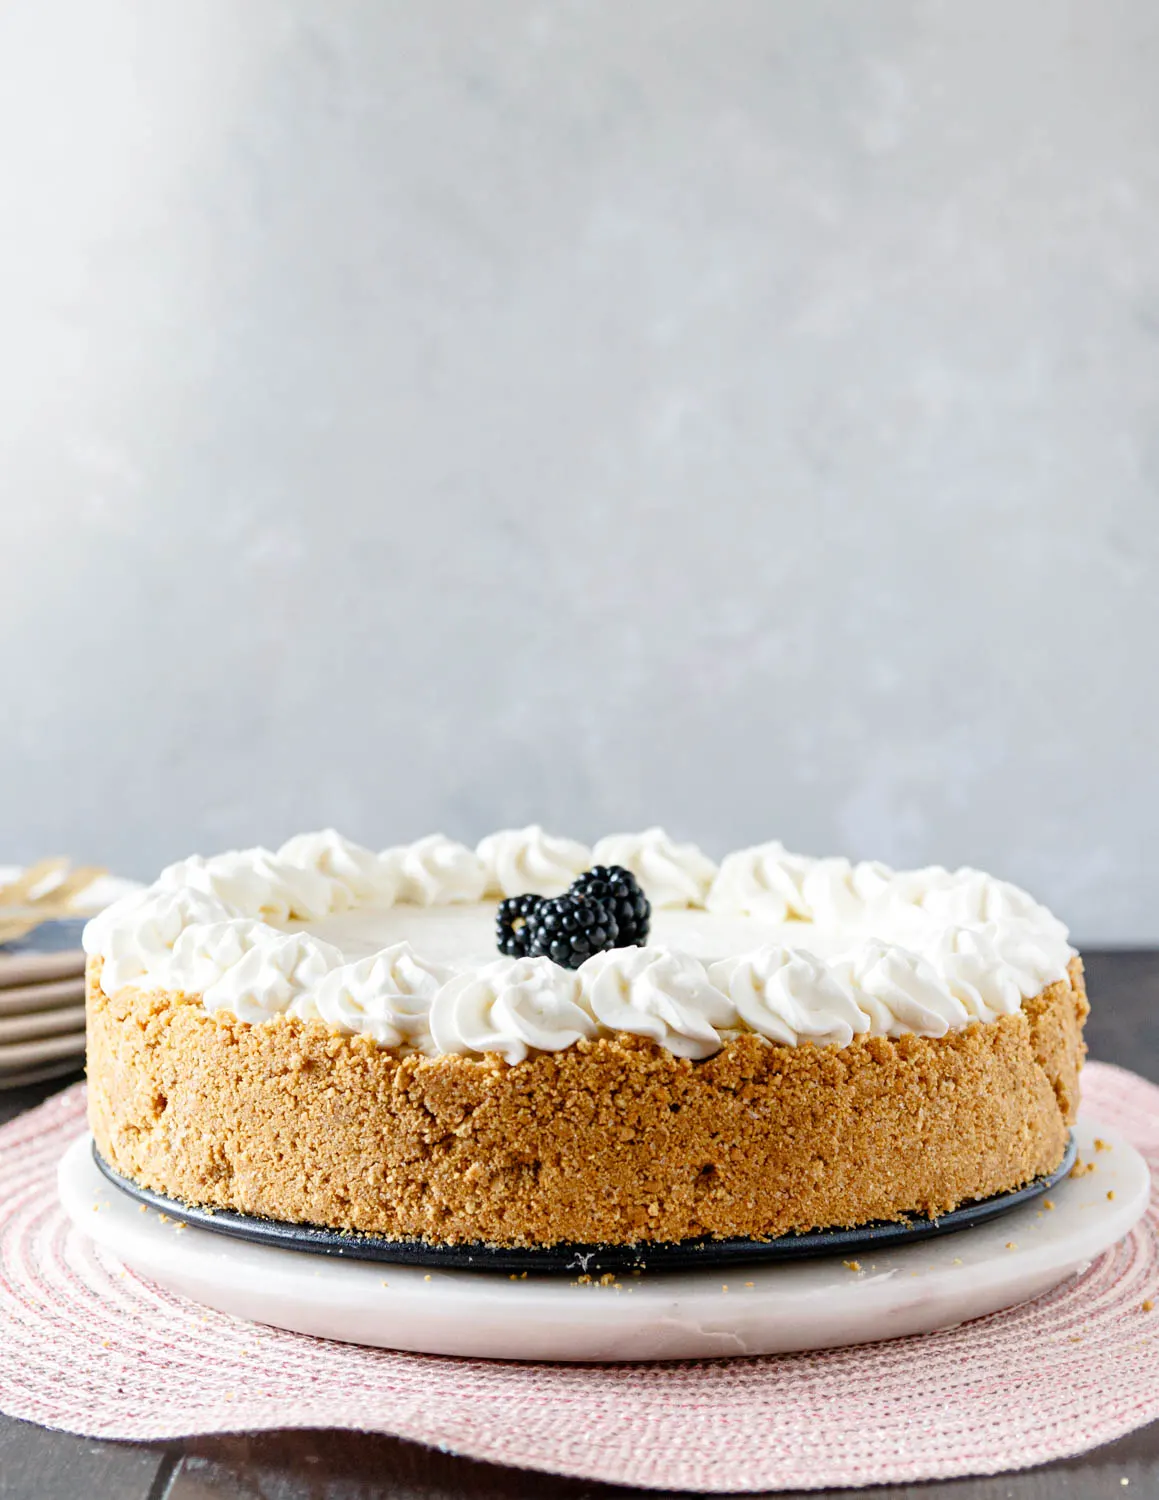 https://goodiegodmother.com/wp-content/uploads/2022/03/whole-no-bake-cheesecake-on-a-serving-dish.jpg.webp